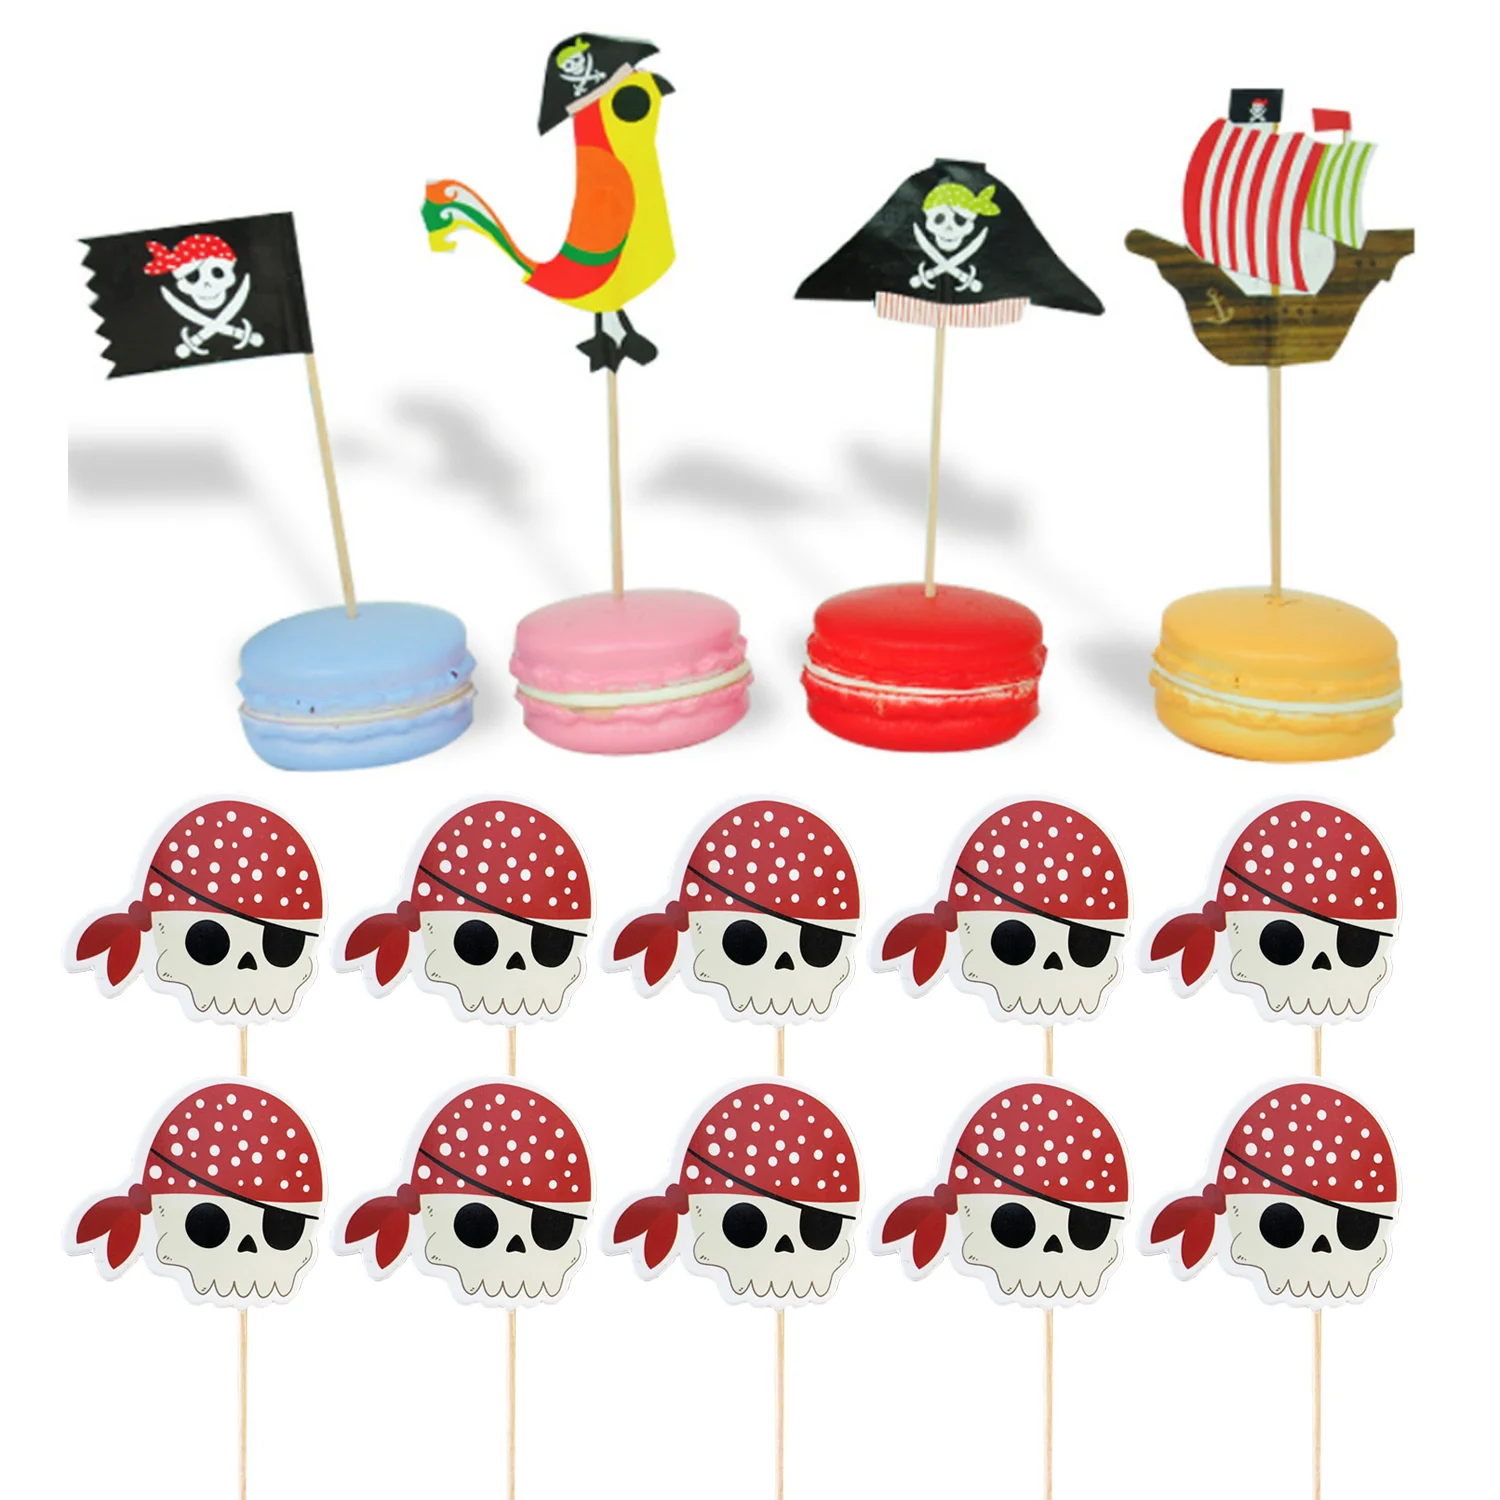 

Behogar 45pcs Pirate Cupcake Toppers Cake Picks Decorations for Pirate Theme Birthday Halloween Party Supplies